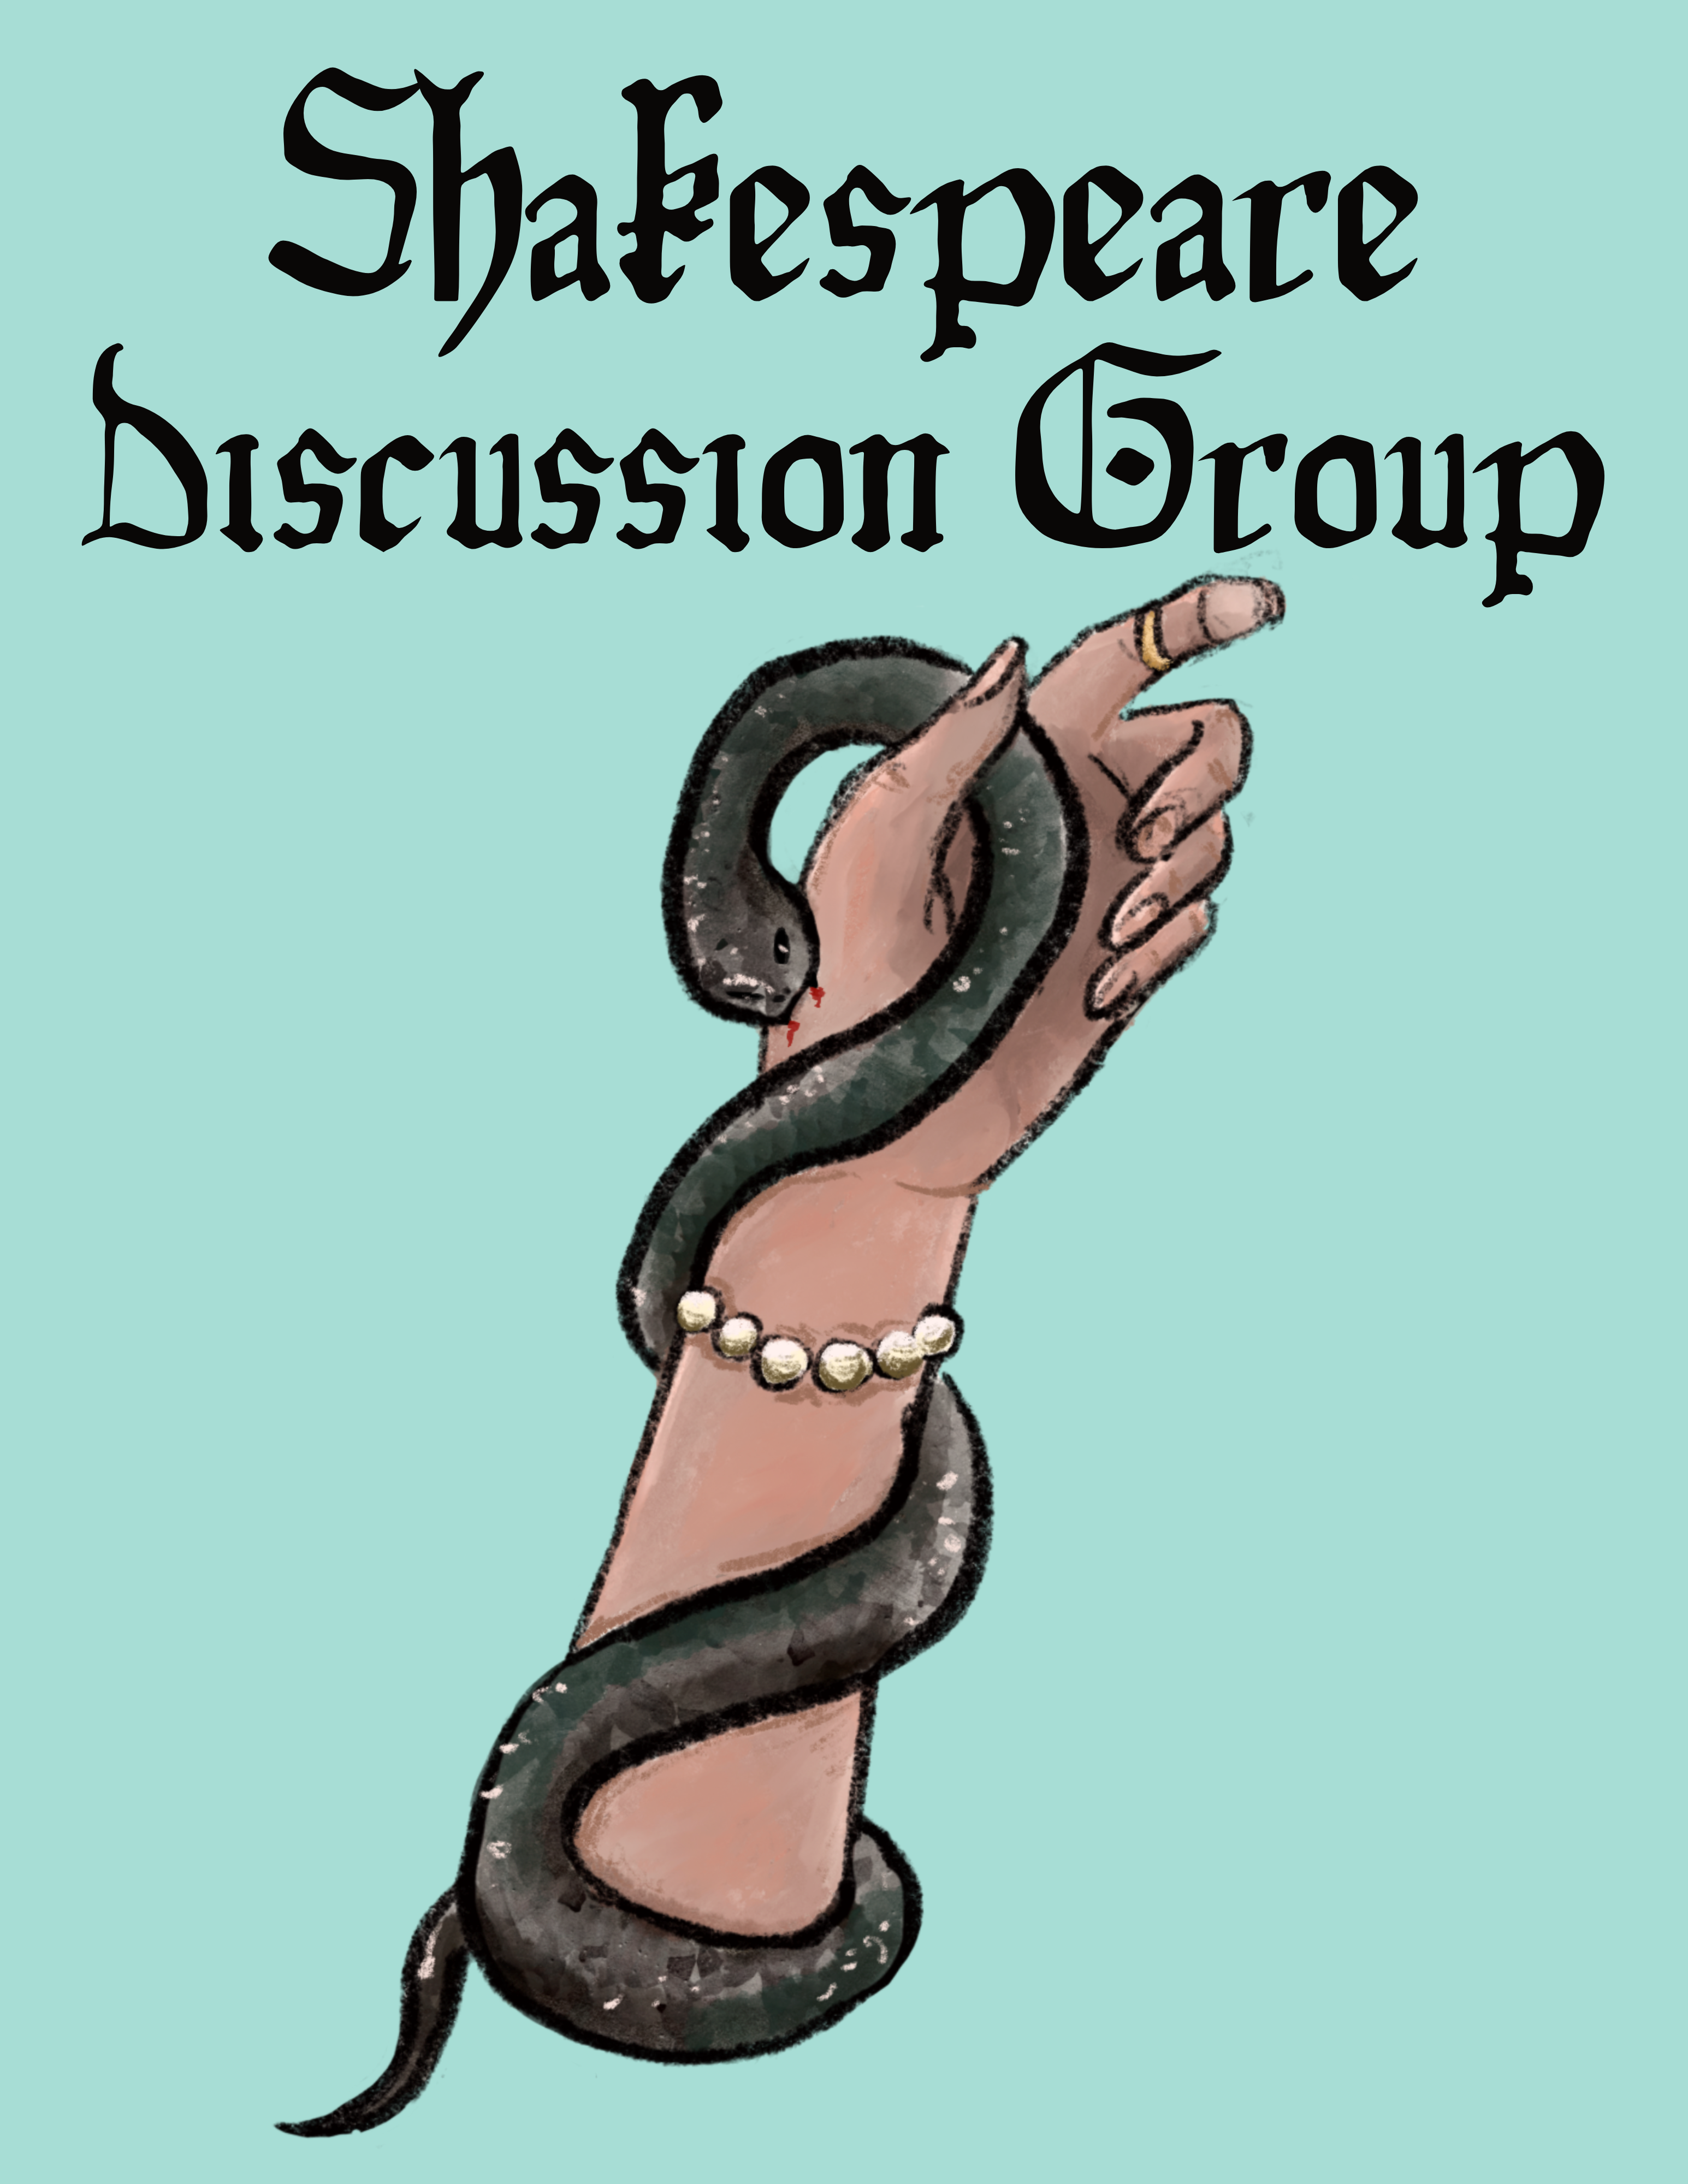 woman's hand with serpent wrapped around arm, wrist and hand Shakespeare Discussion Group